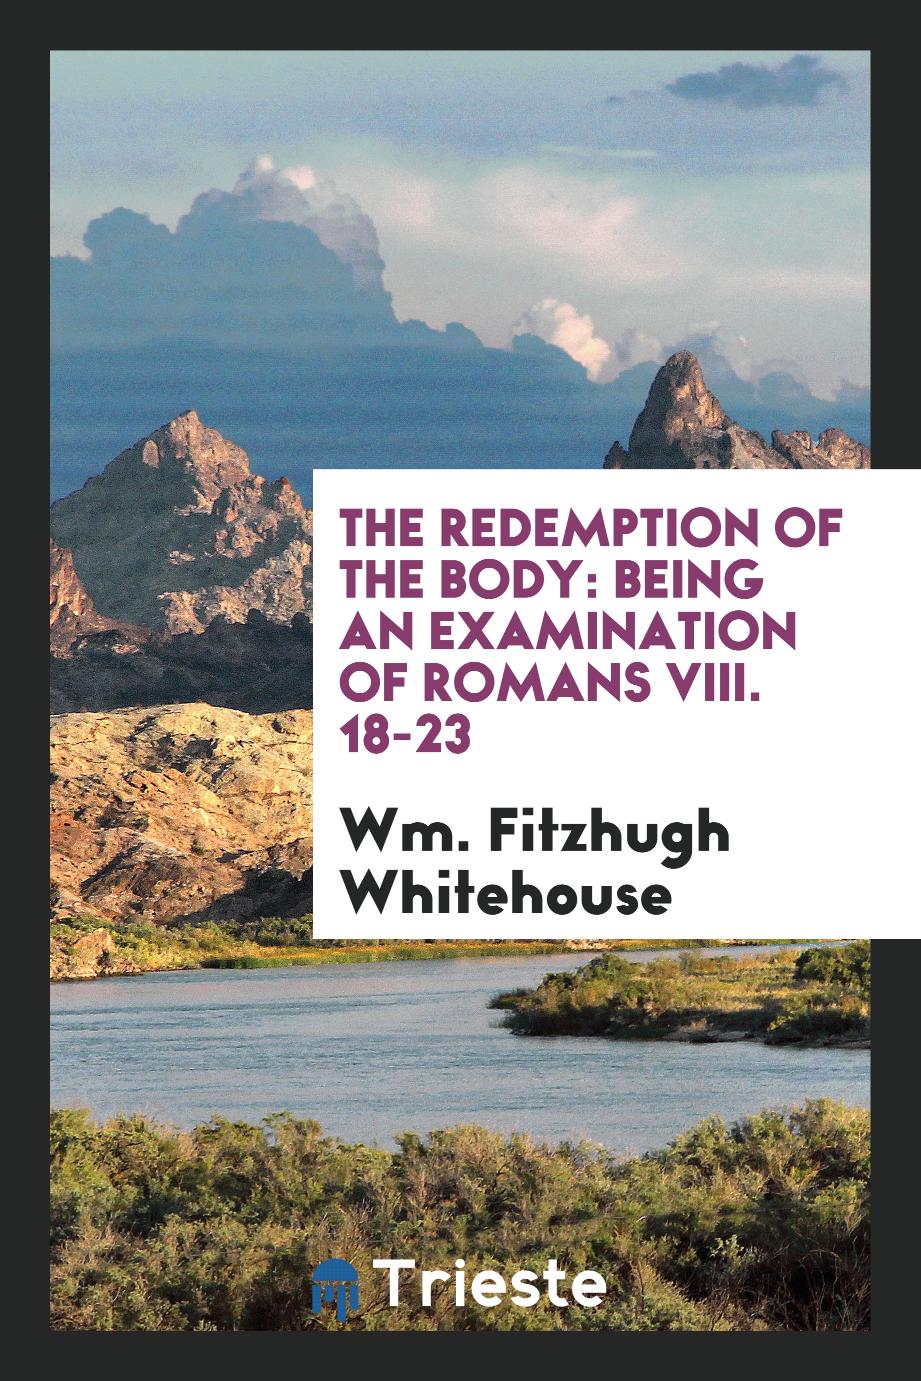 The redemption of the body: Being an examination of Romans VIII. 18-23